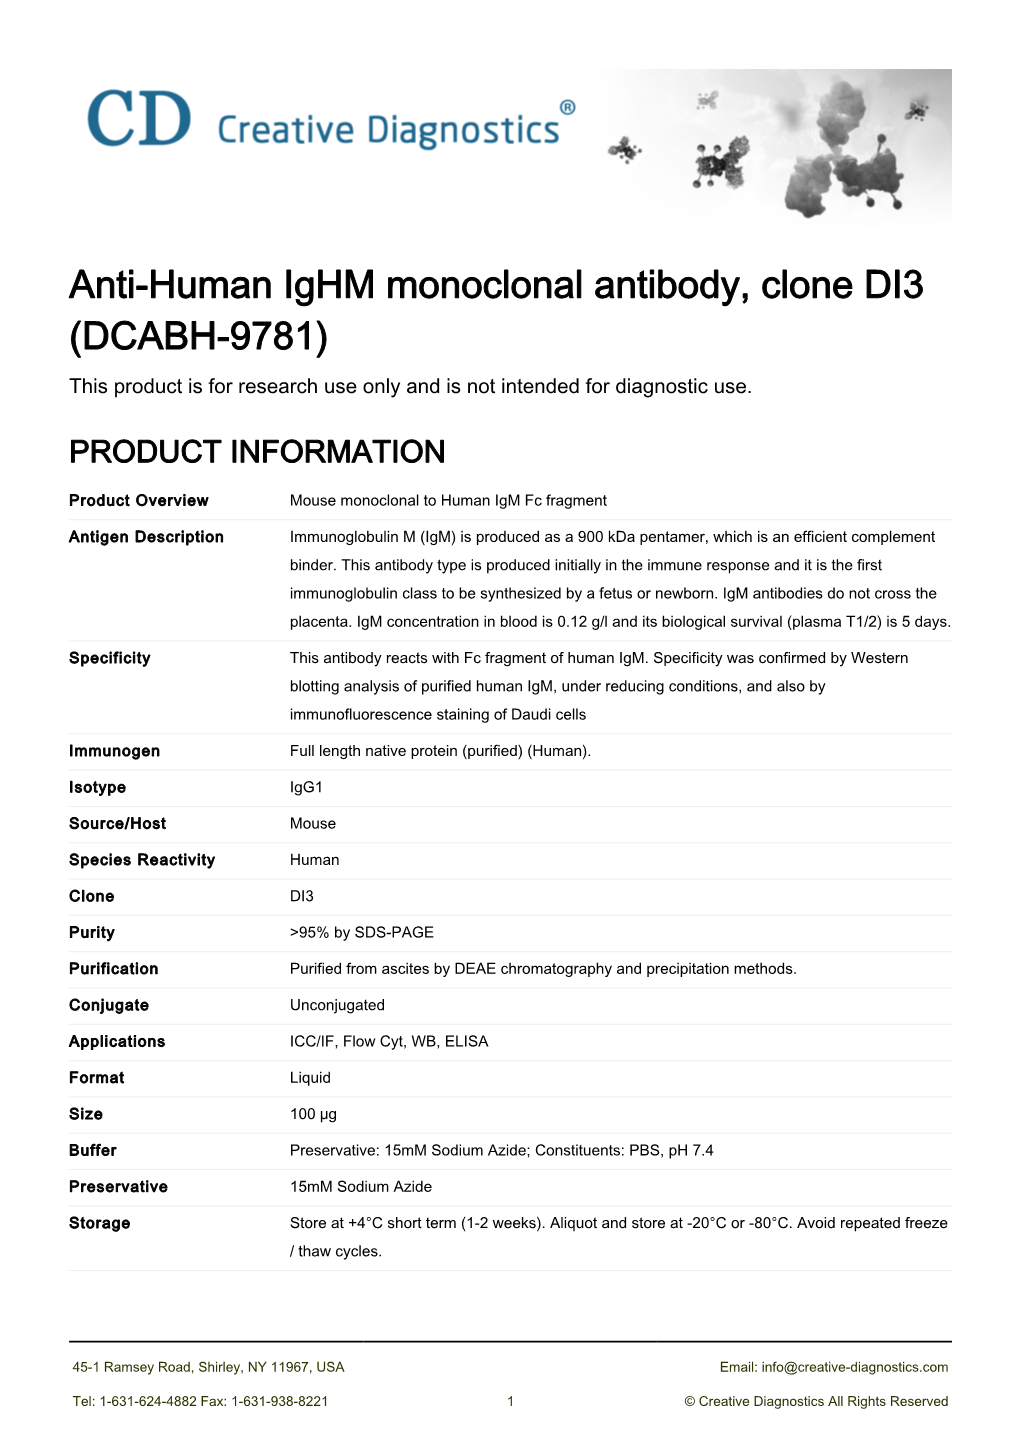 Anti-Human Ighm Monoclonal Antibody, Clone DI3 (DCABH-9781) This Product Is for Research Use Only and Is Not Intended for Diagnostic Use